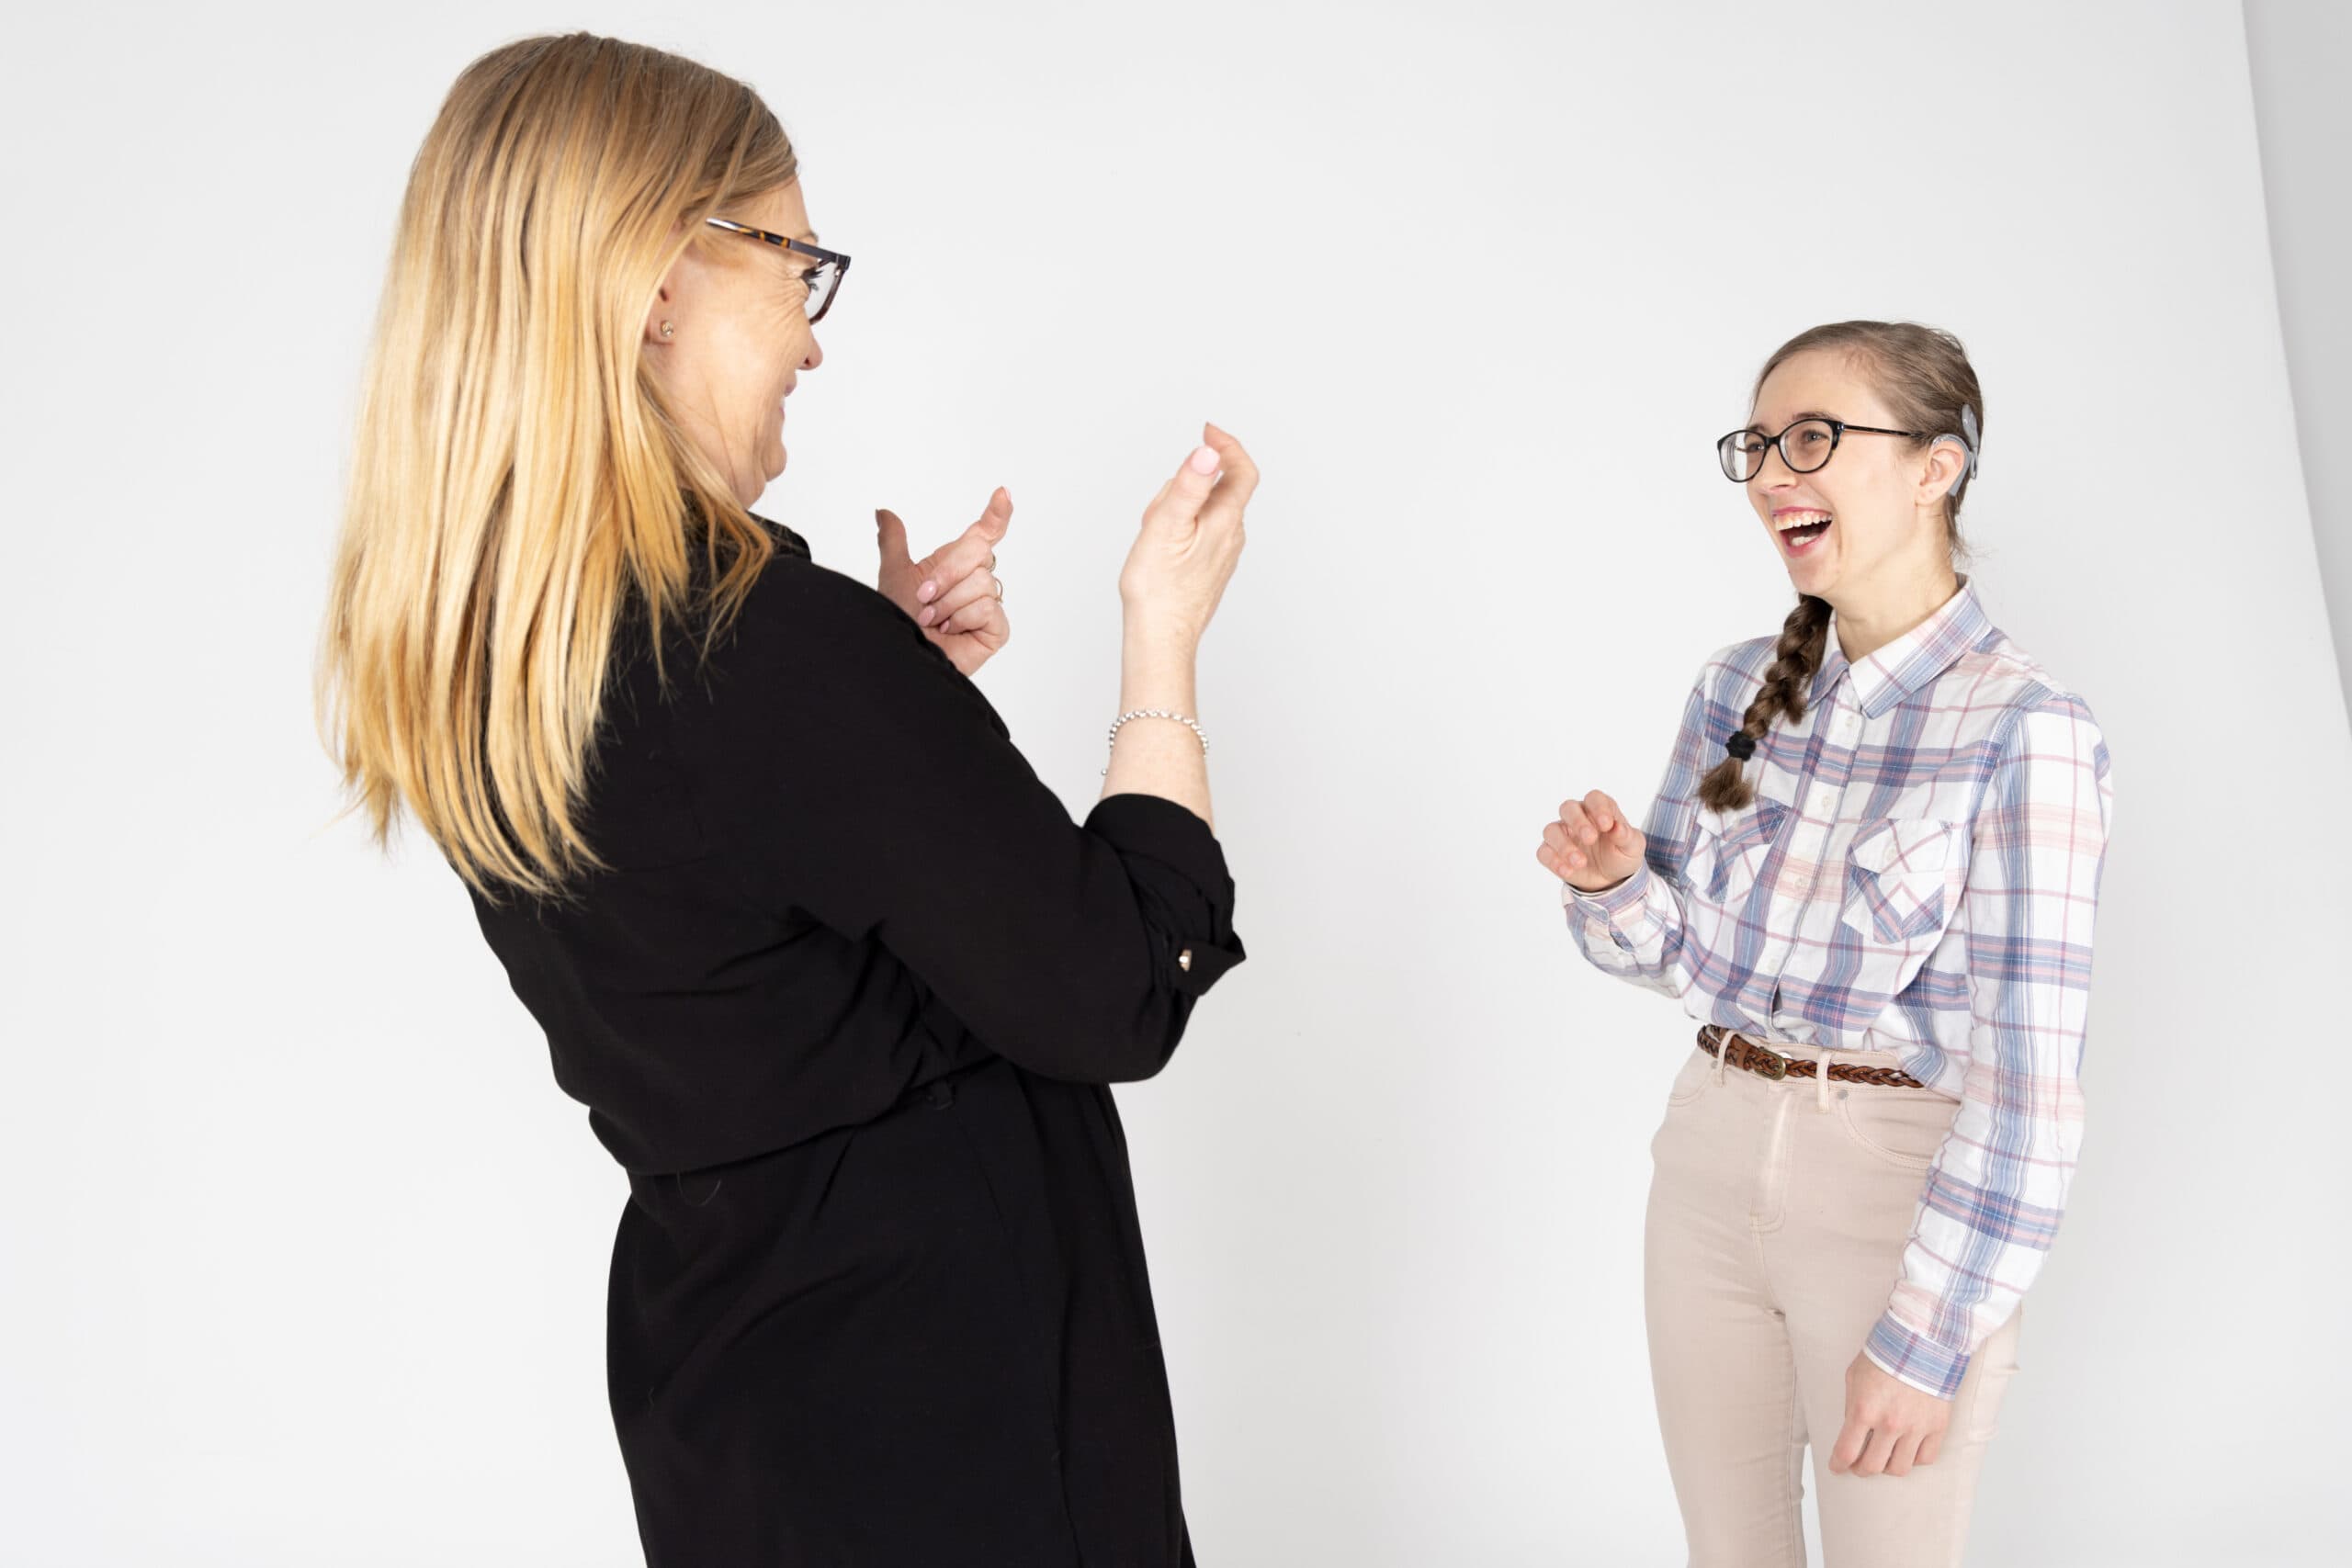 A young woman wearing glasses and a checked shirt having a laugh with another woman in black clothes as they use sign language.